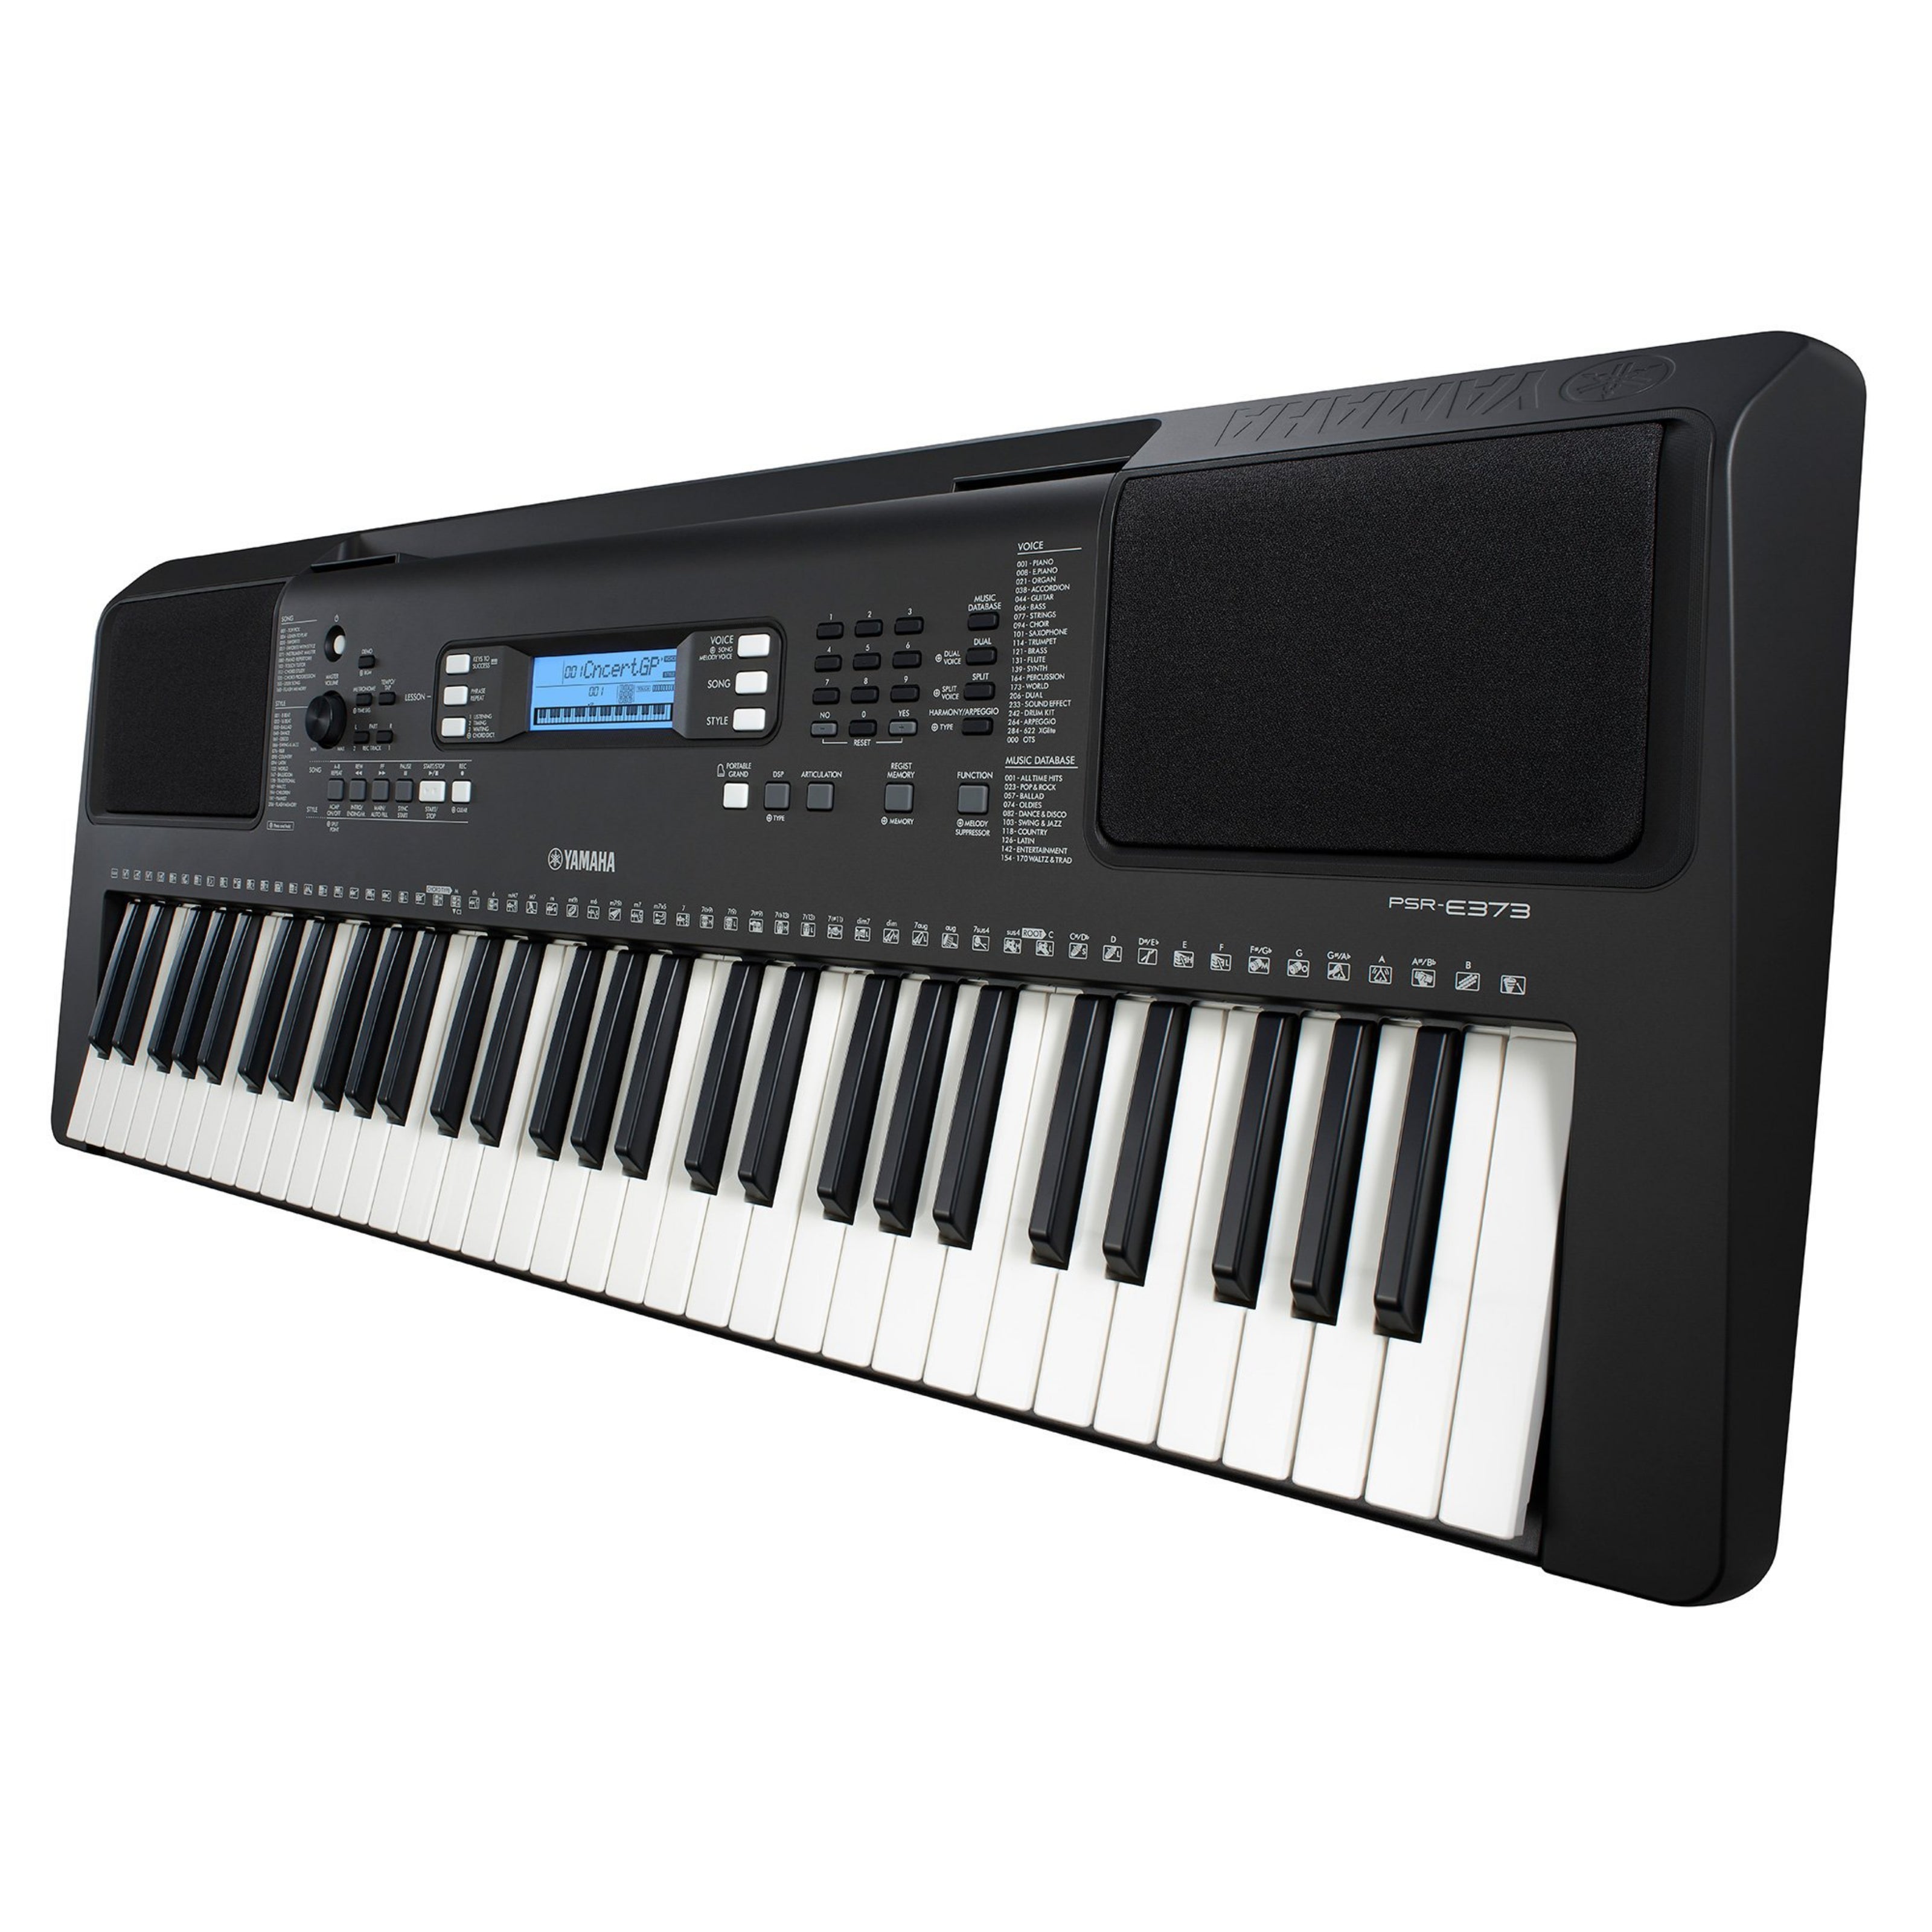 Keyboards and Pianos